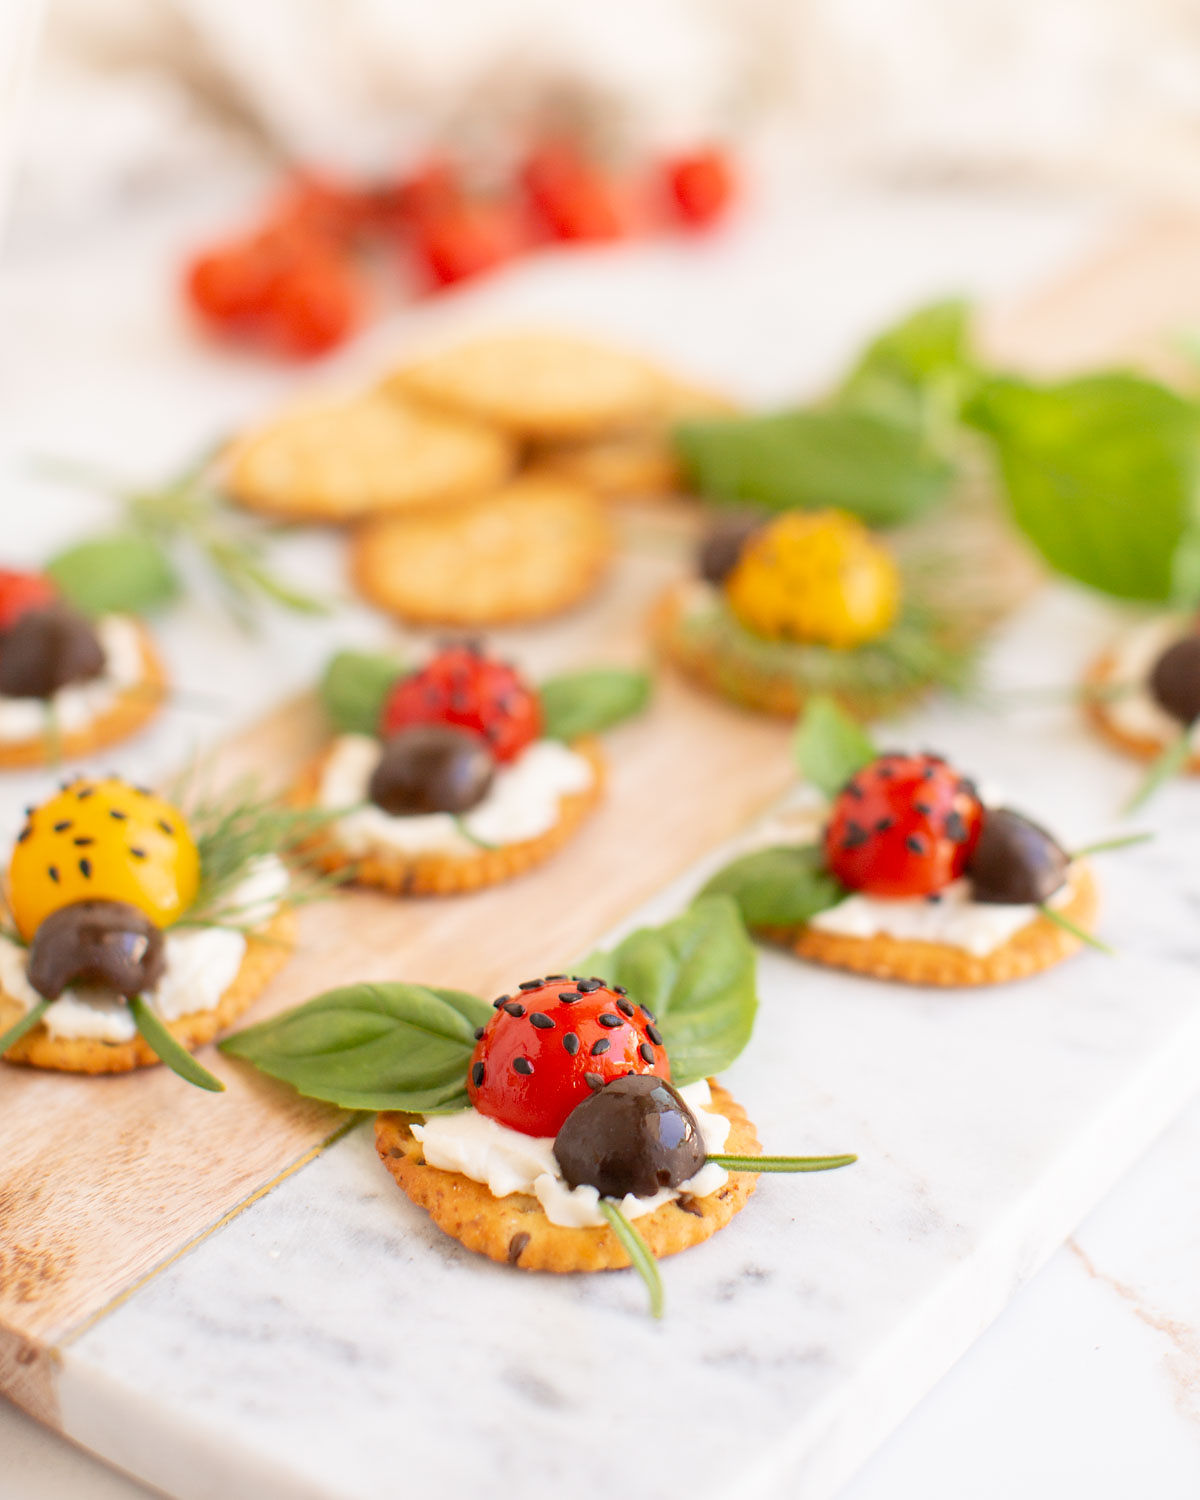 Crackers topped with a ladybug design made from cherry tomatoes, basil, and black olives.